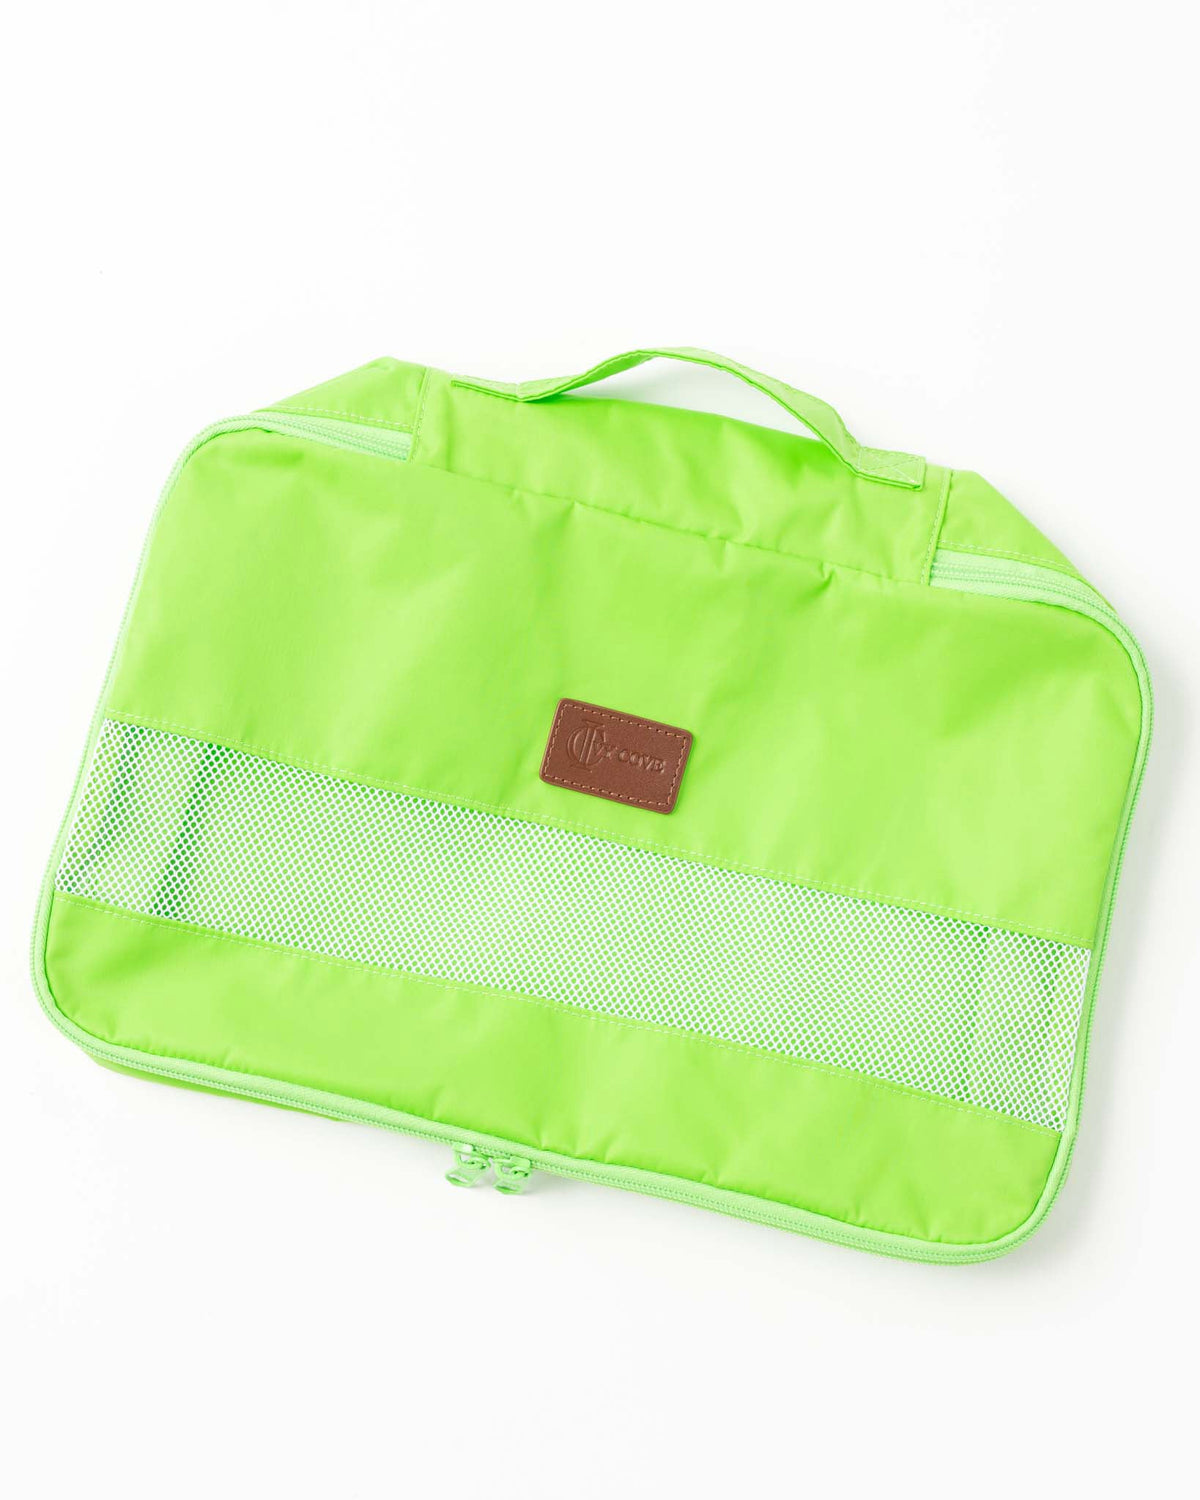 Freshwater Packing Cubes - Ivy Cove Montecito